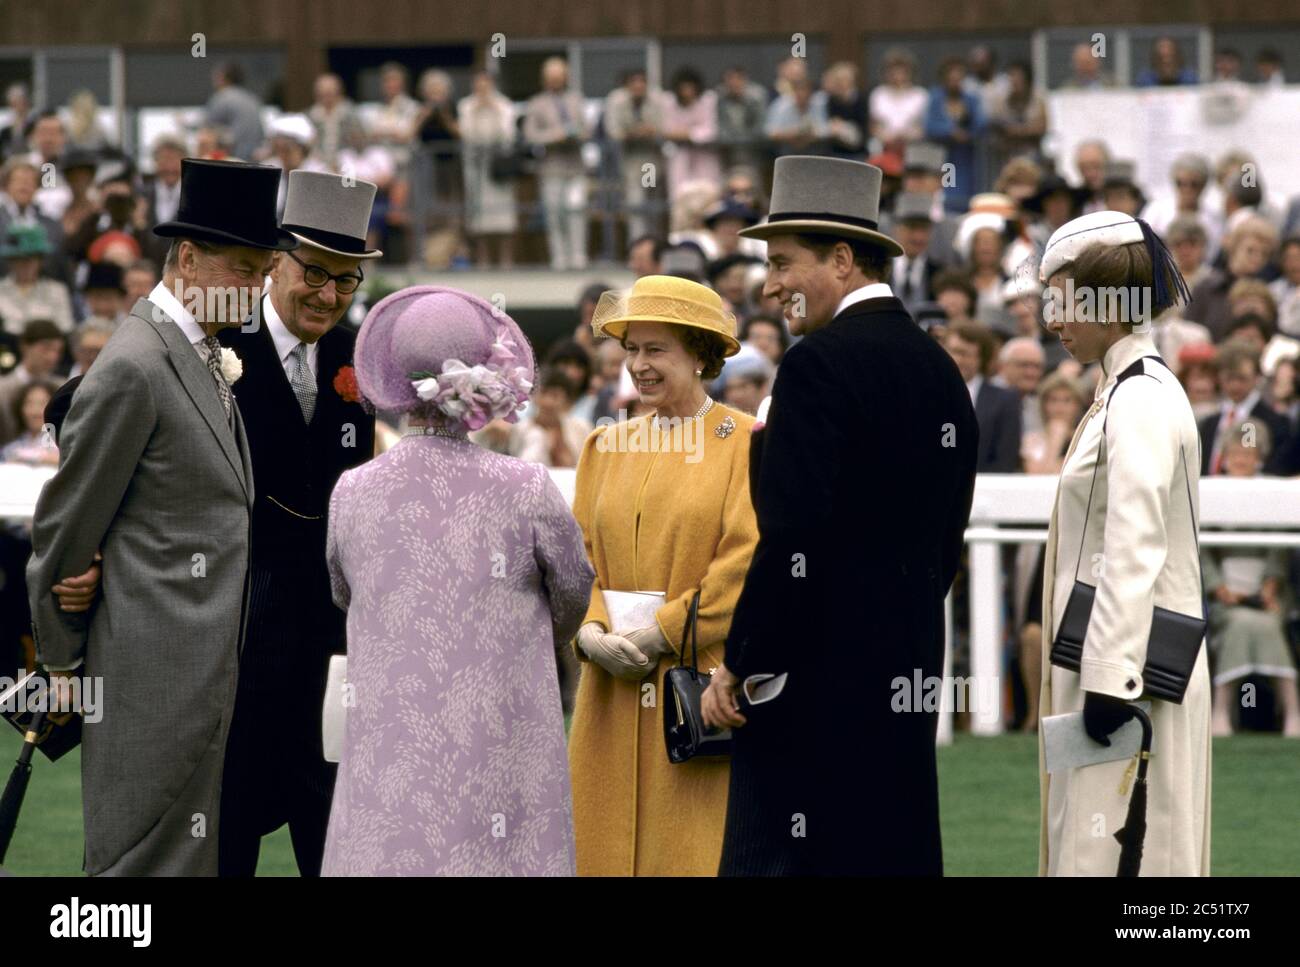 Queen Elizabeth 1980s UK. Queen Mother, Princess Ann and courtiers the Derby Day horse racing Epsom Downs. Lord Porchester the Earl Carnarvon half back view in black tail coat. Circa 1985 HOMER SYKES Stock Photo